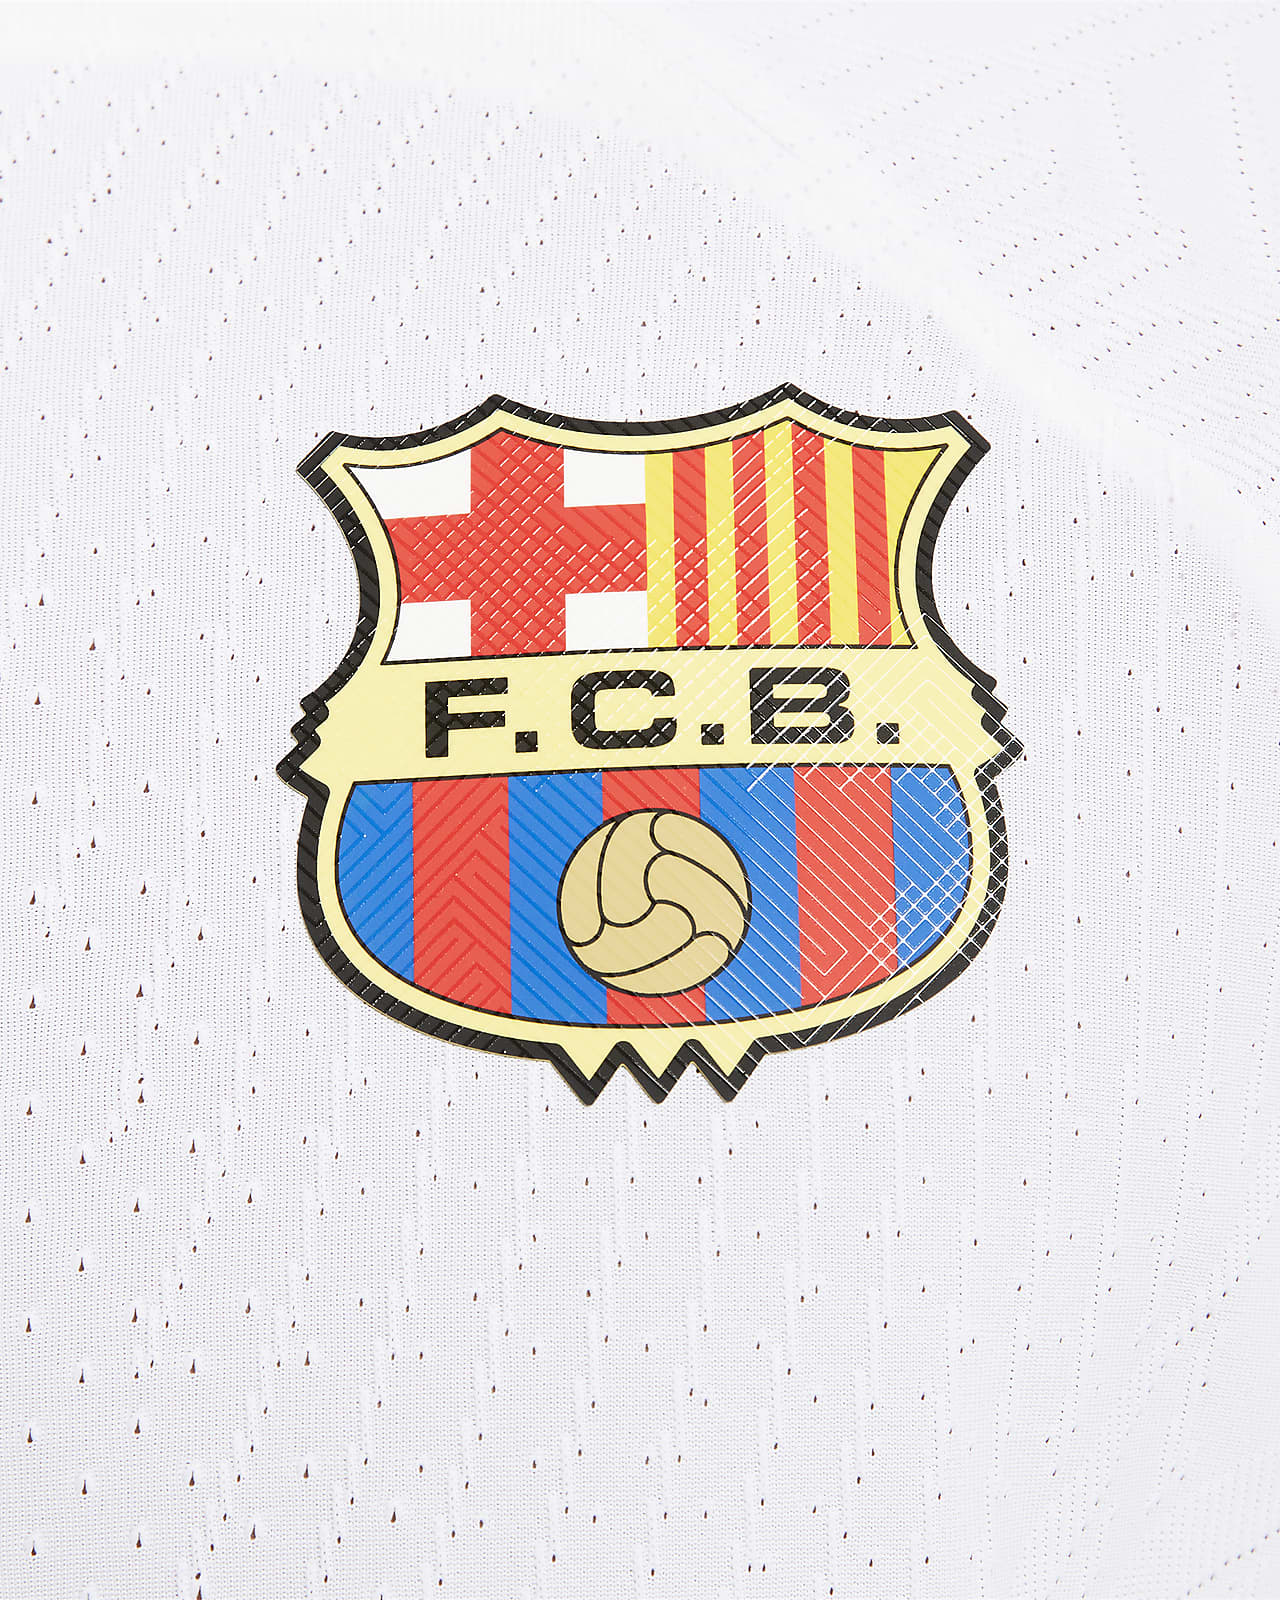 FC Barcelona - Ultra-Soft Dri-Fit fabric helps keep you cool, drawing sweat  away from the body to the exterior of the shirt. Teixit Dri-Fit que t'ajuda  a mantener-te fresc, treient la suor